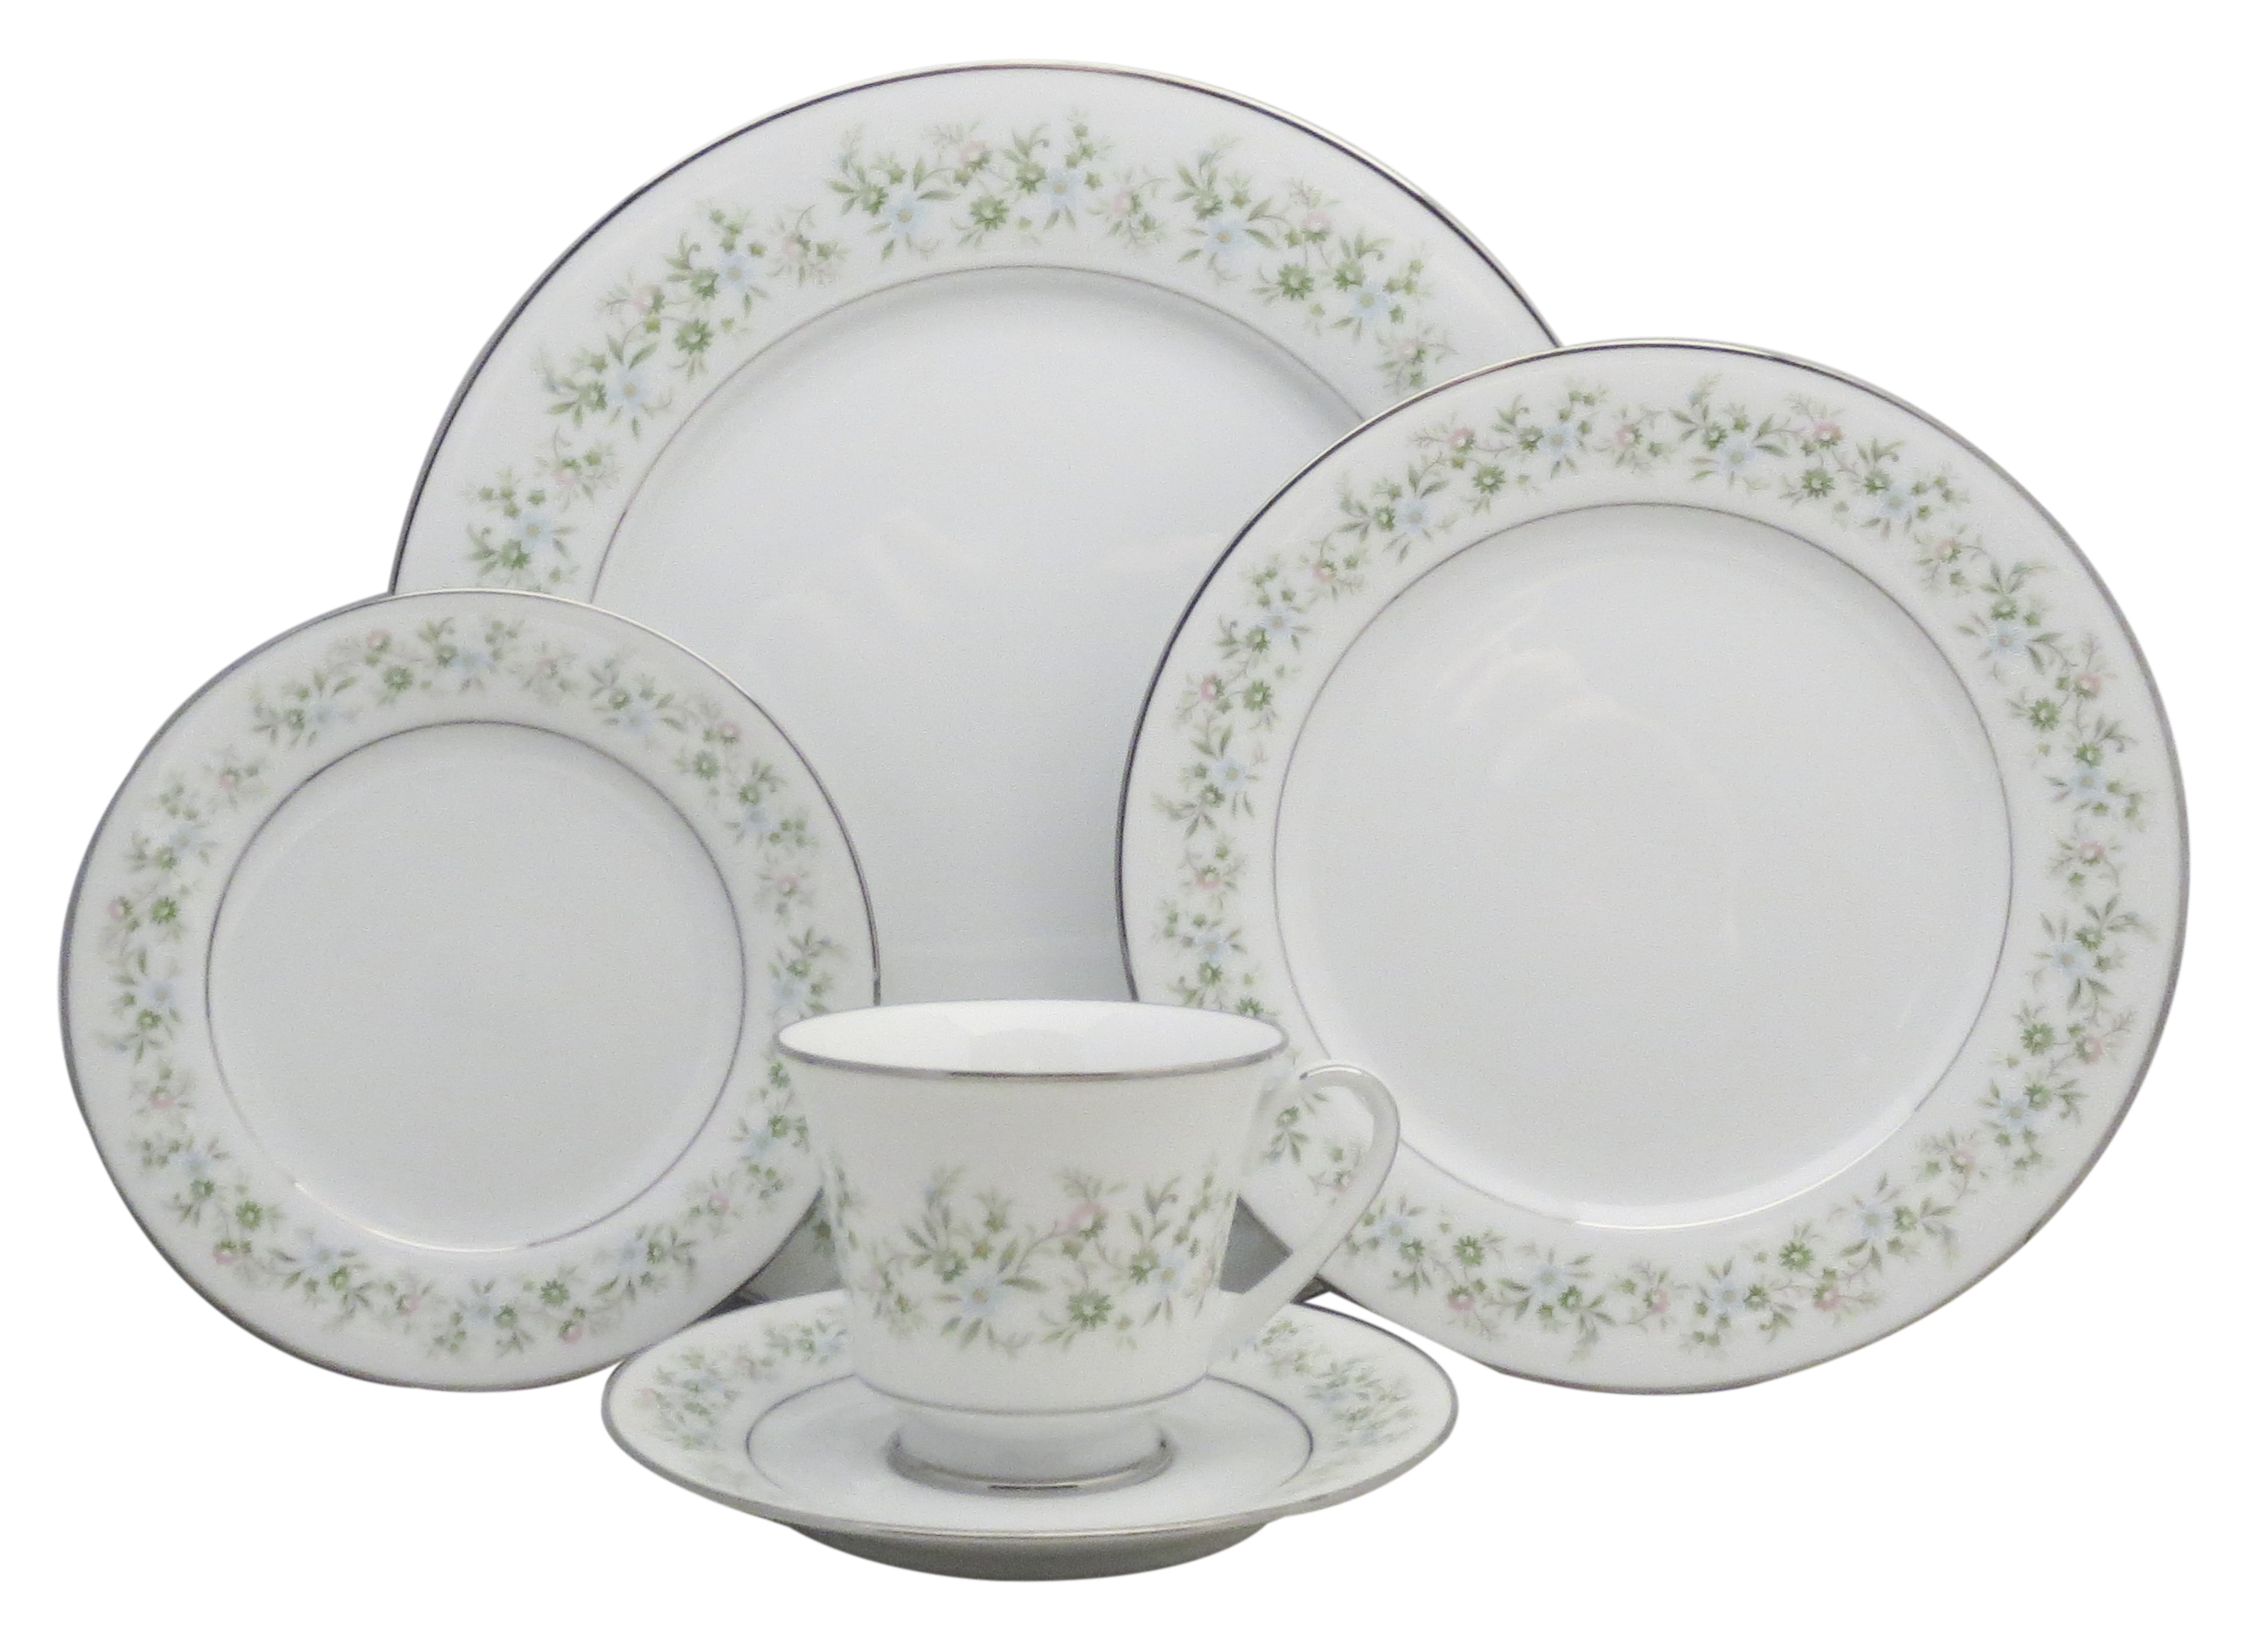 Noritake Fine China SAVANNAH 5 Piece Place Setting multiples available 